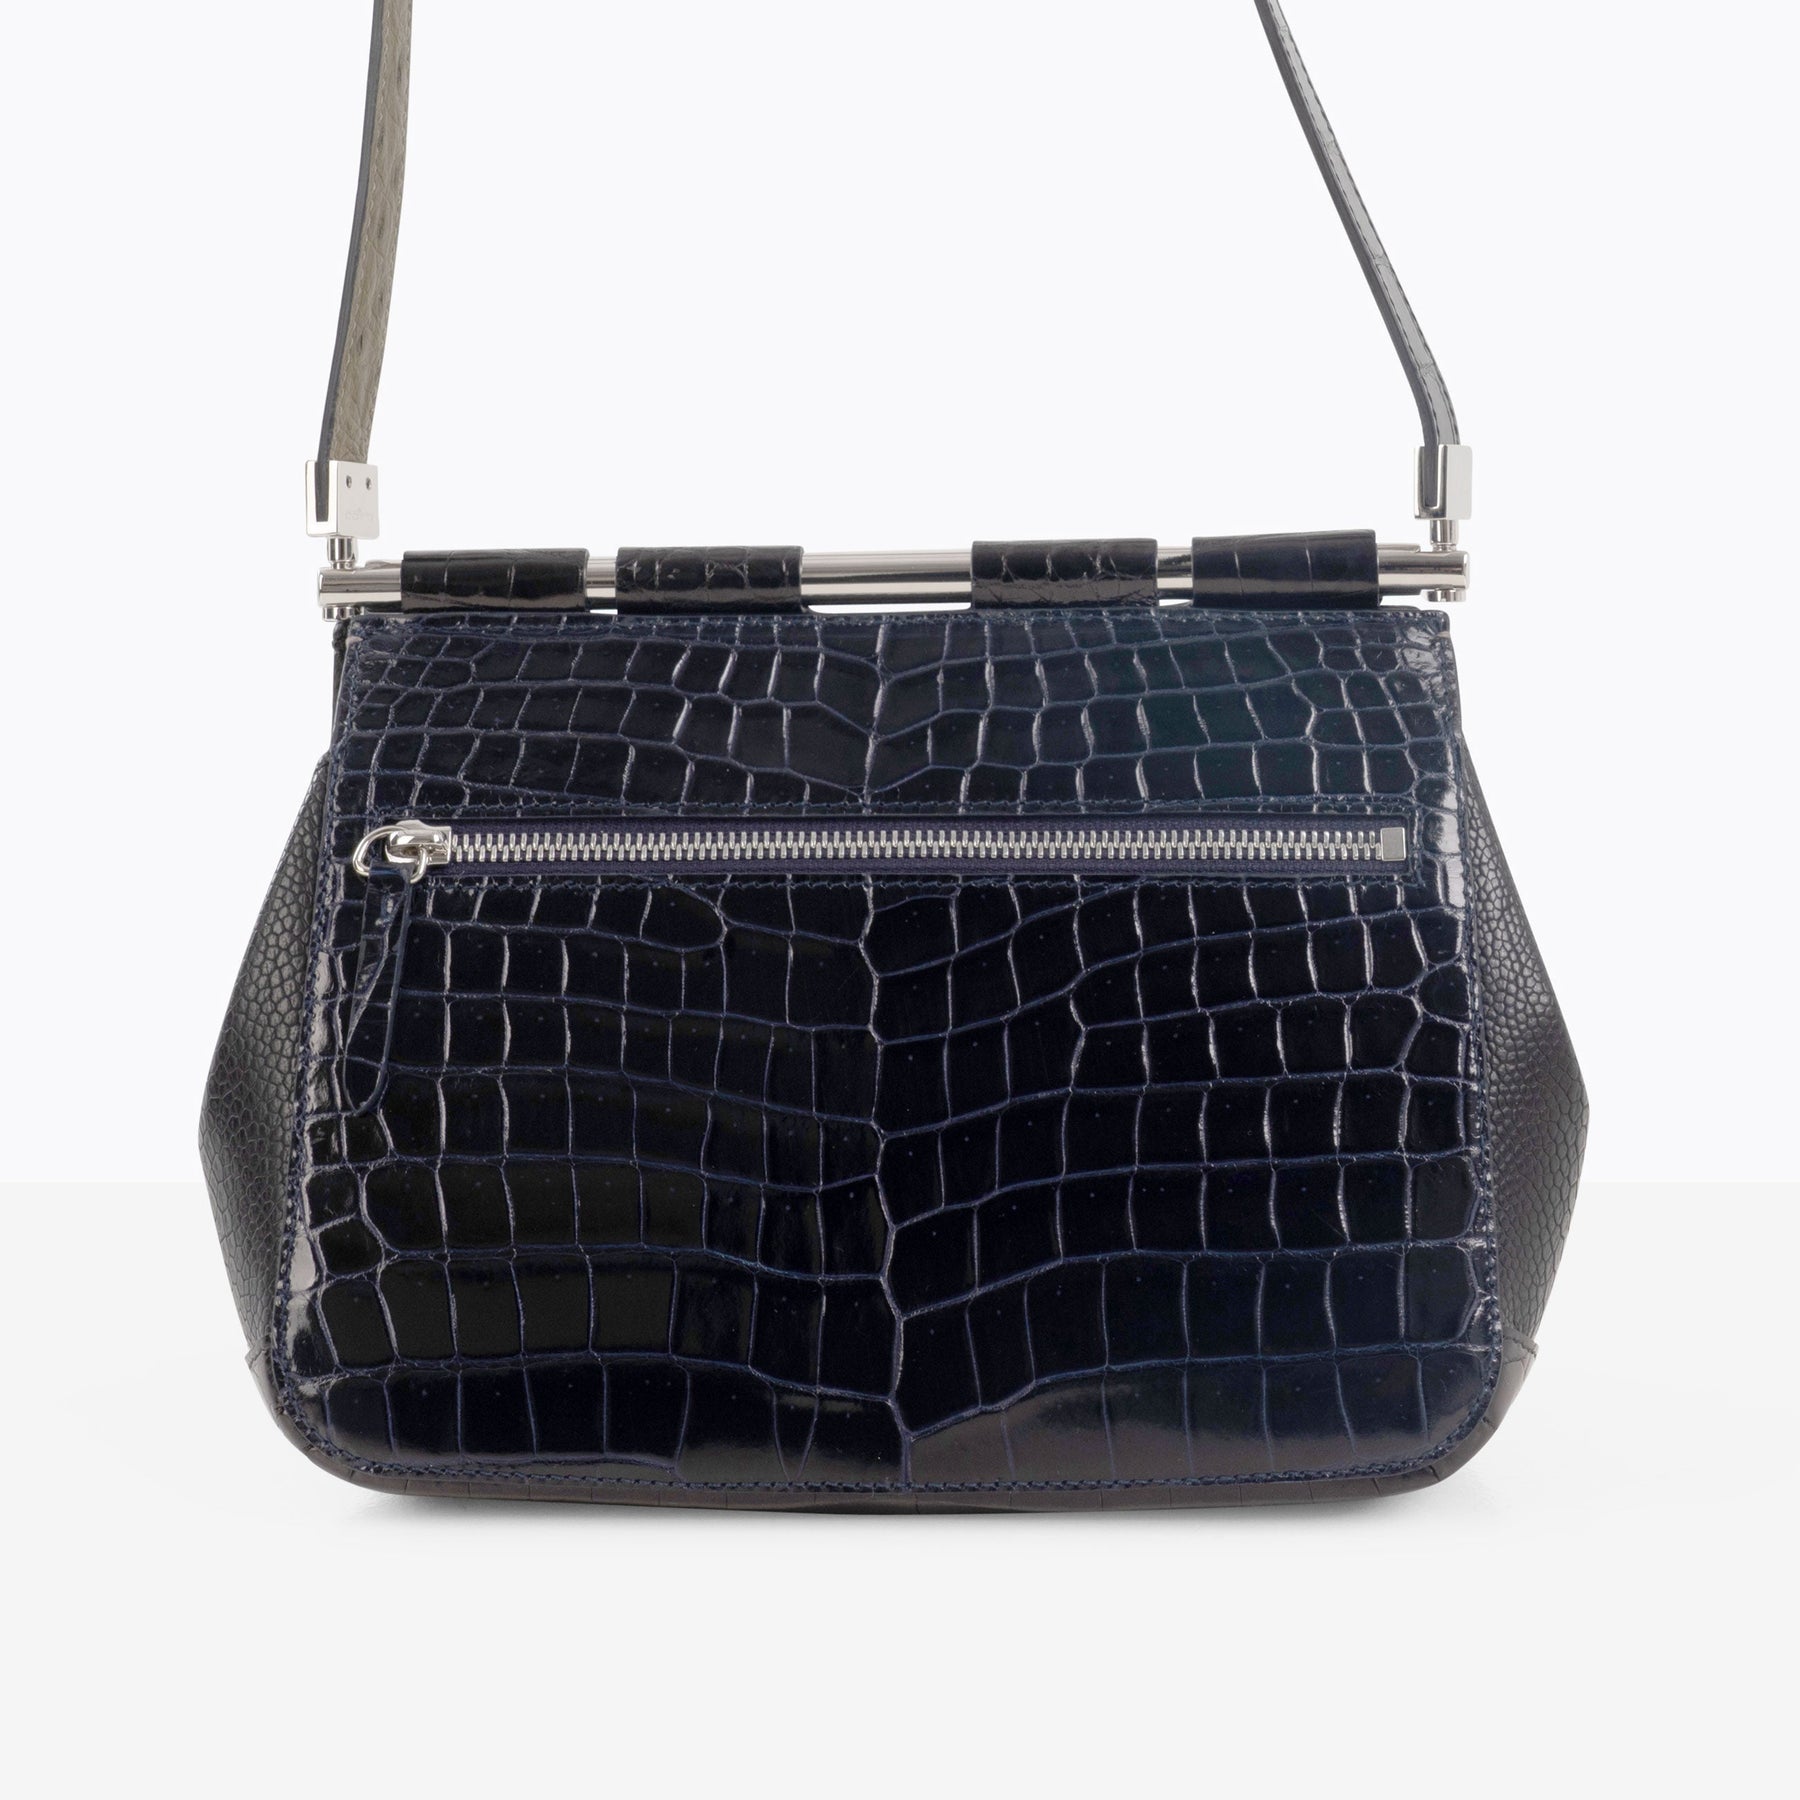 DOTTI Duale Shoulder bag in exotic skins. Made in Italy